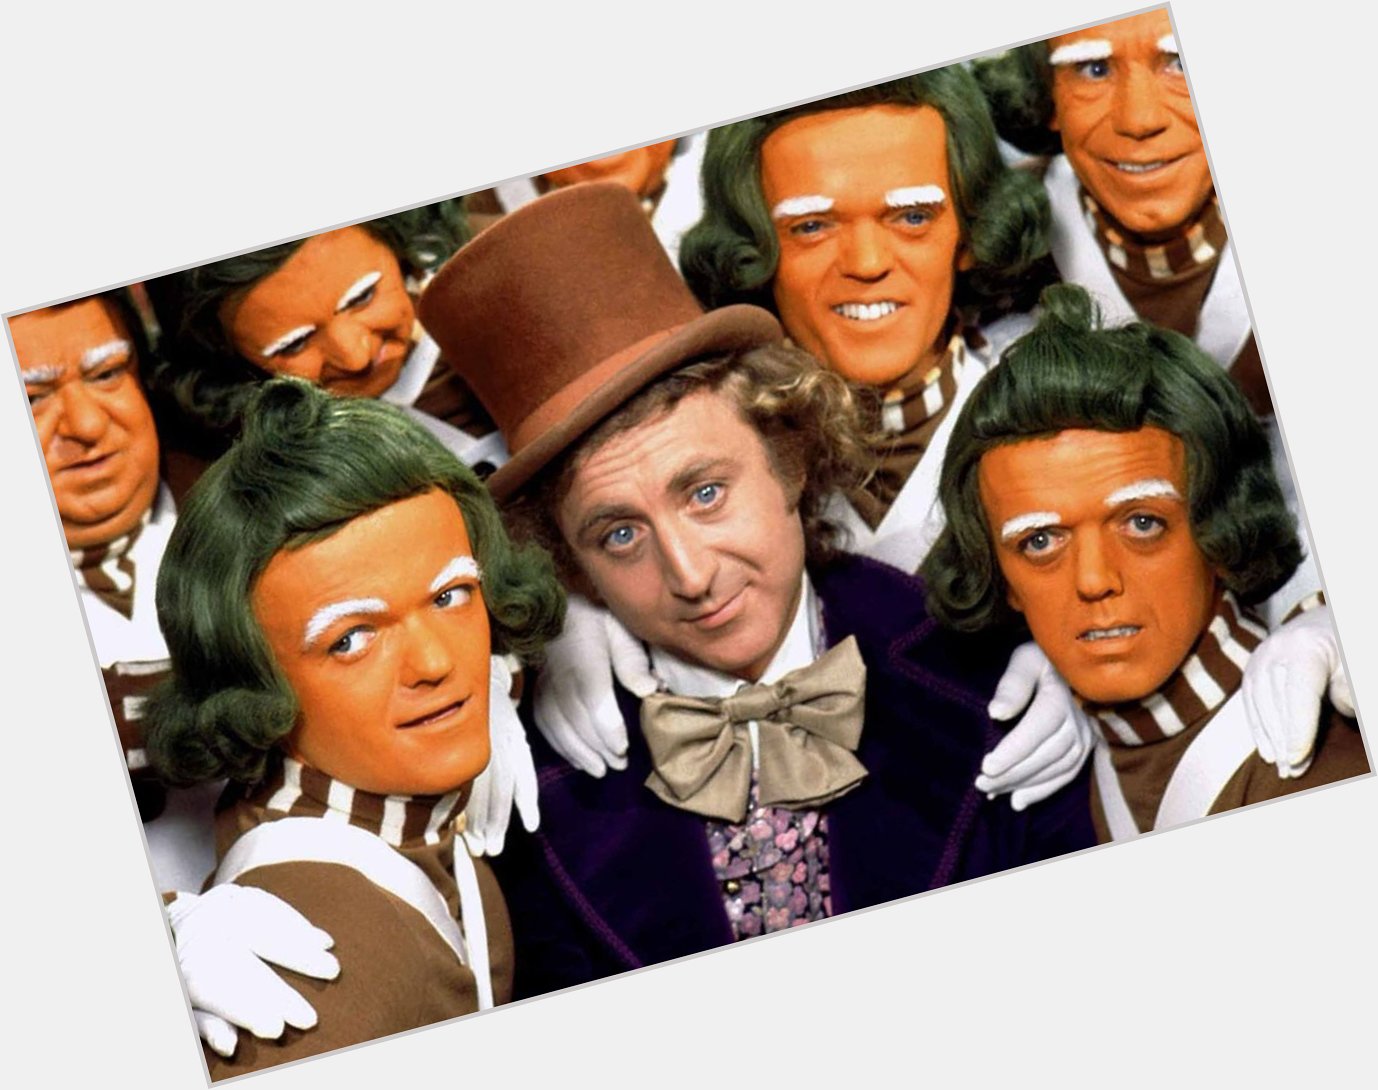 Happy birthday to the great Gene Wilder, he would have been 84 today.  